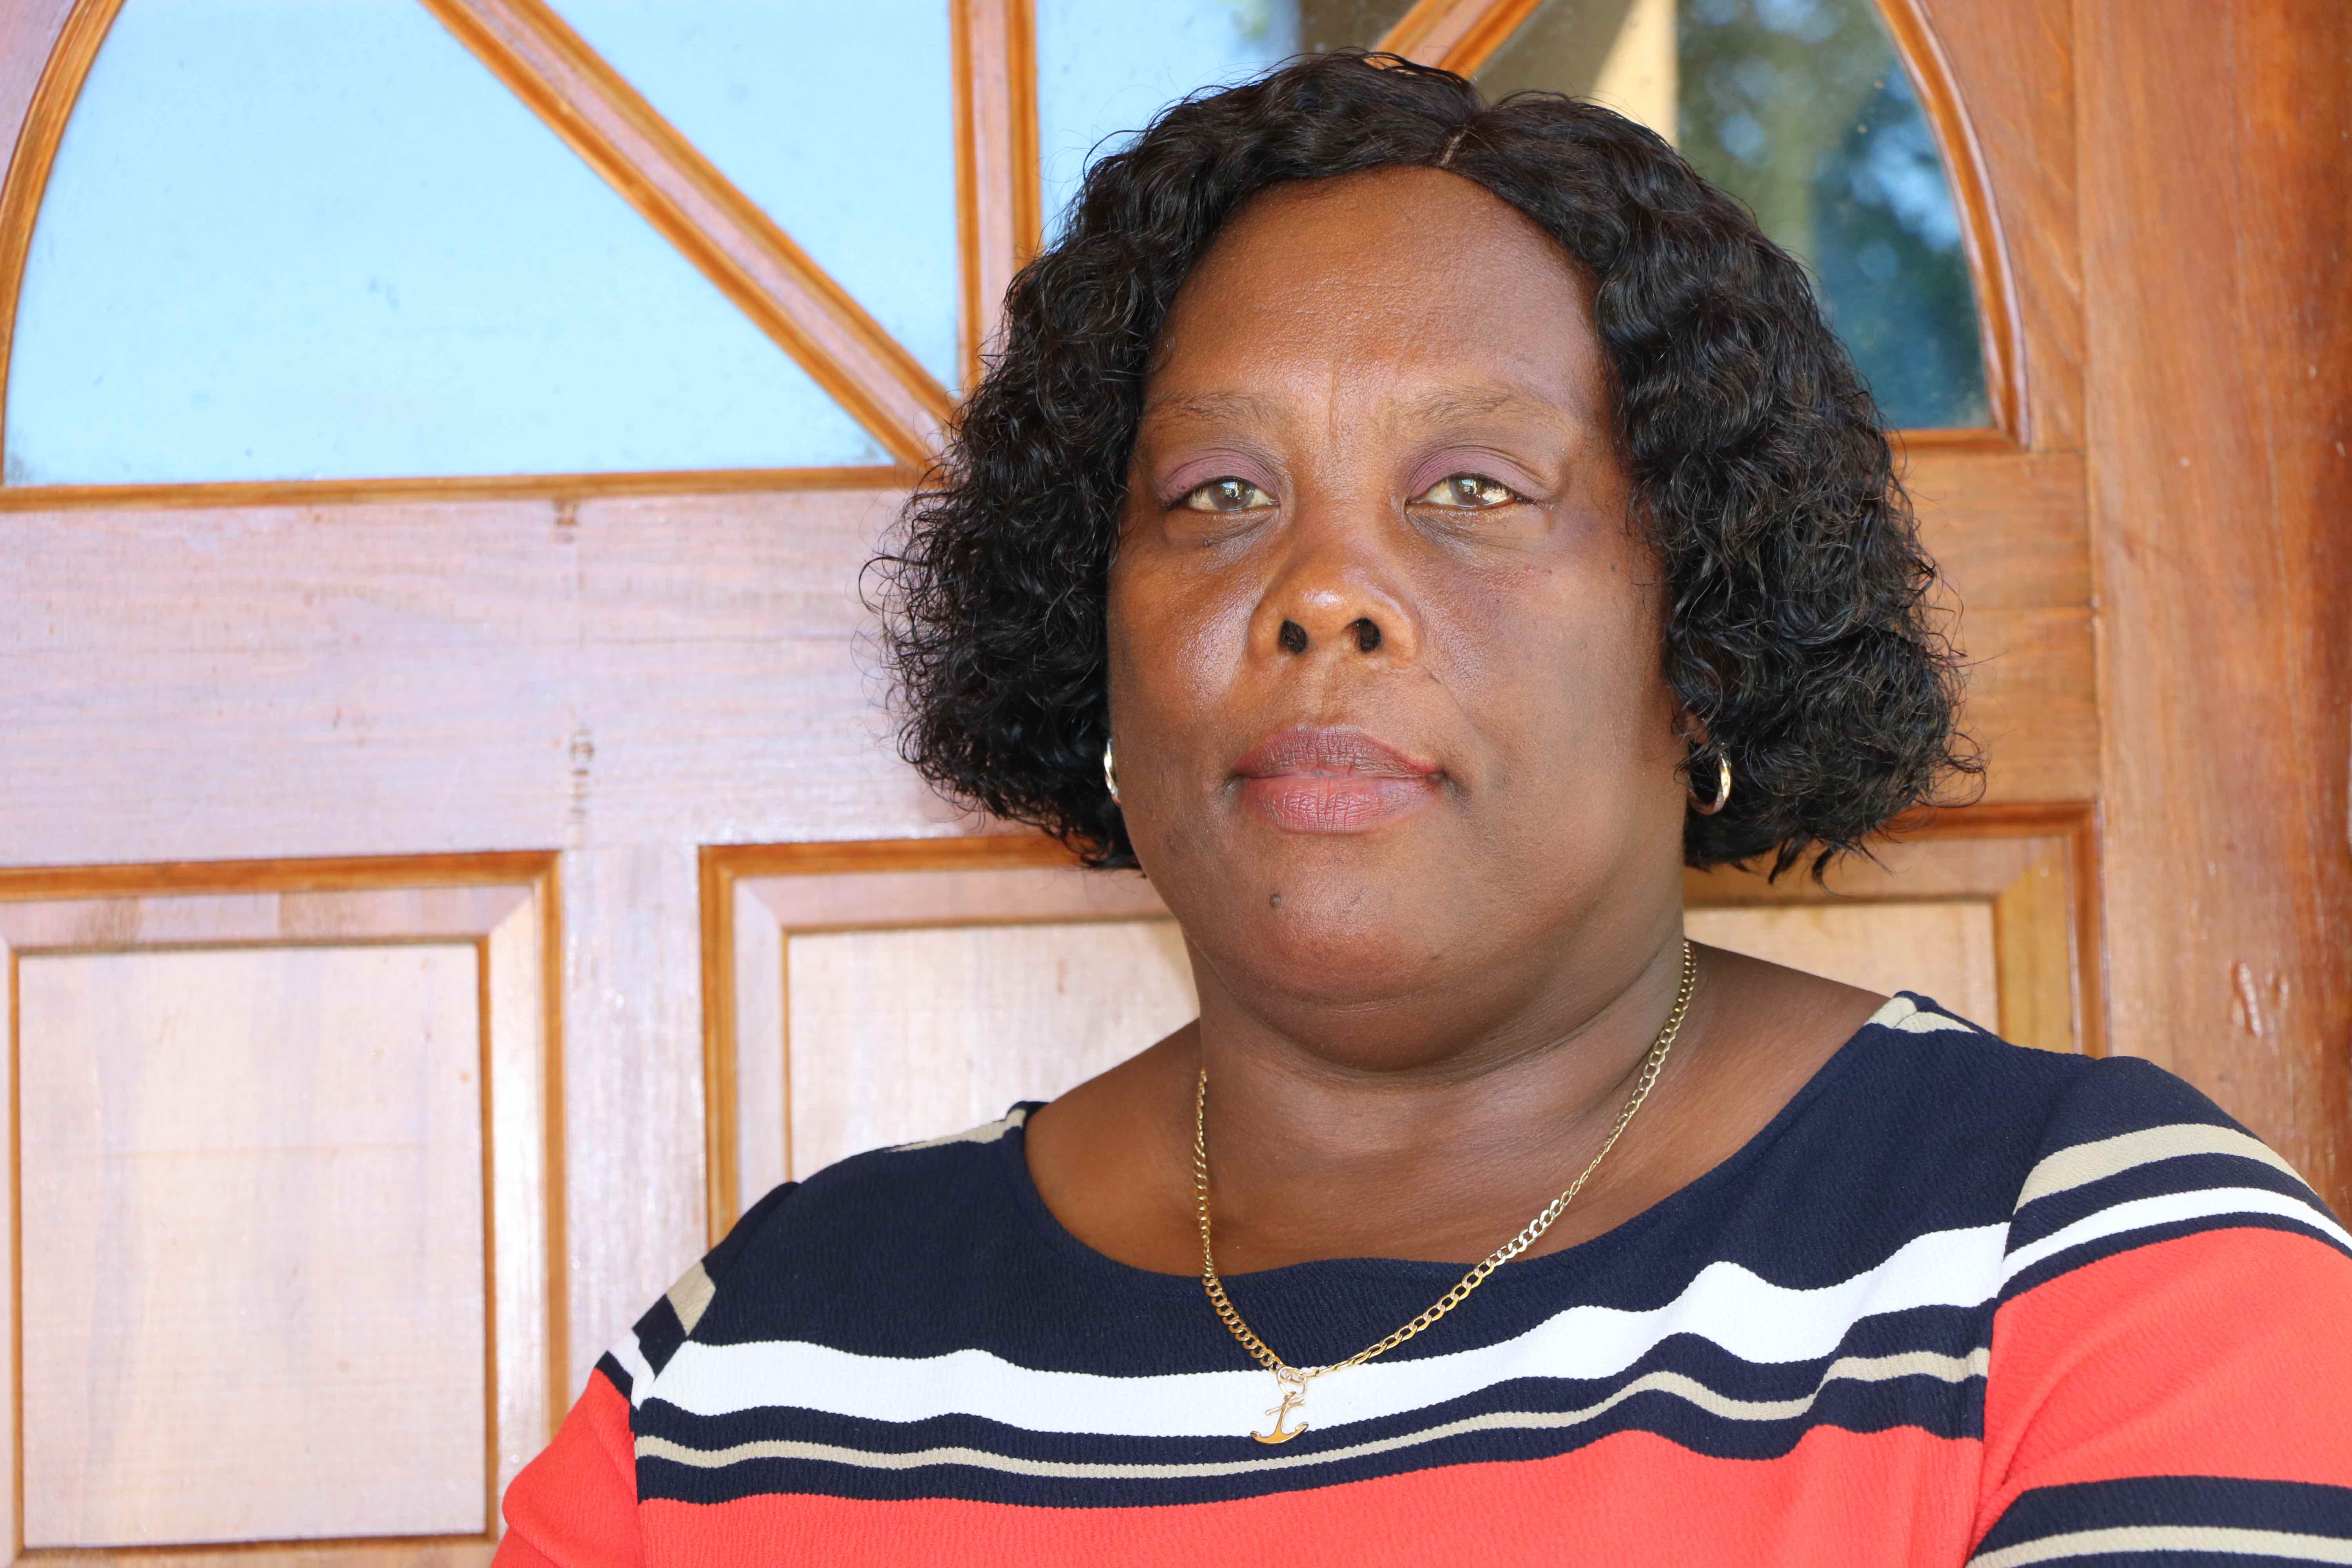 Mrs. Dorriel Phillip, Director of the Department of Statistics and Economic Planning in the Ministry of Finance, in the Nevis Island Administration